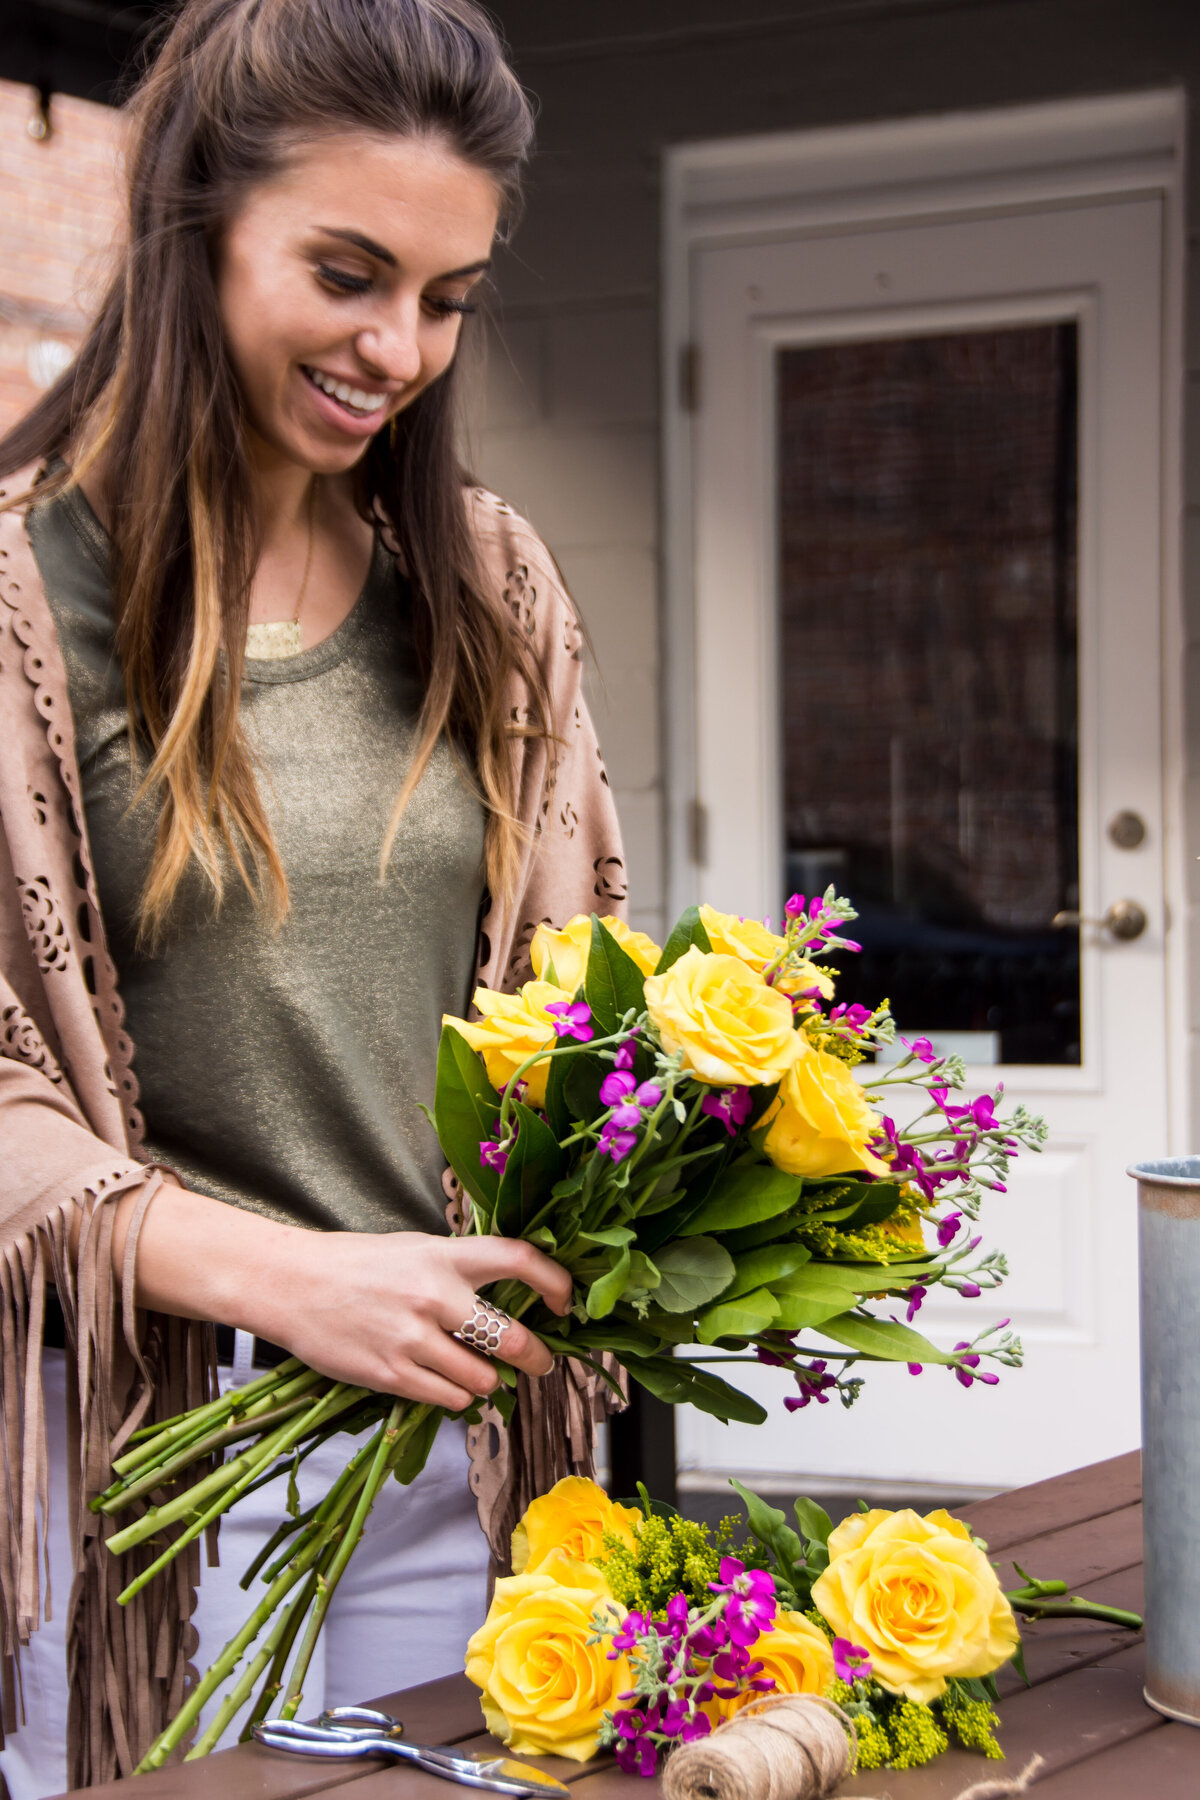 Smiling florist looks down at a bouquet of yellow and purple flowers